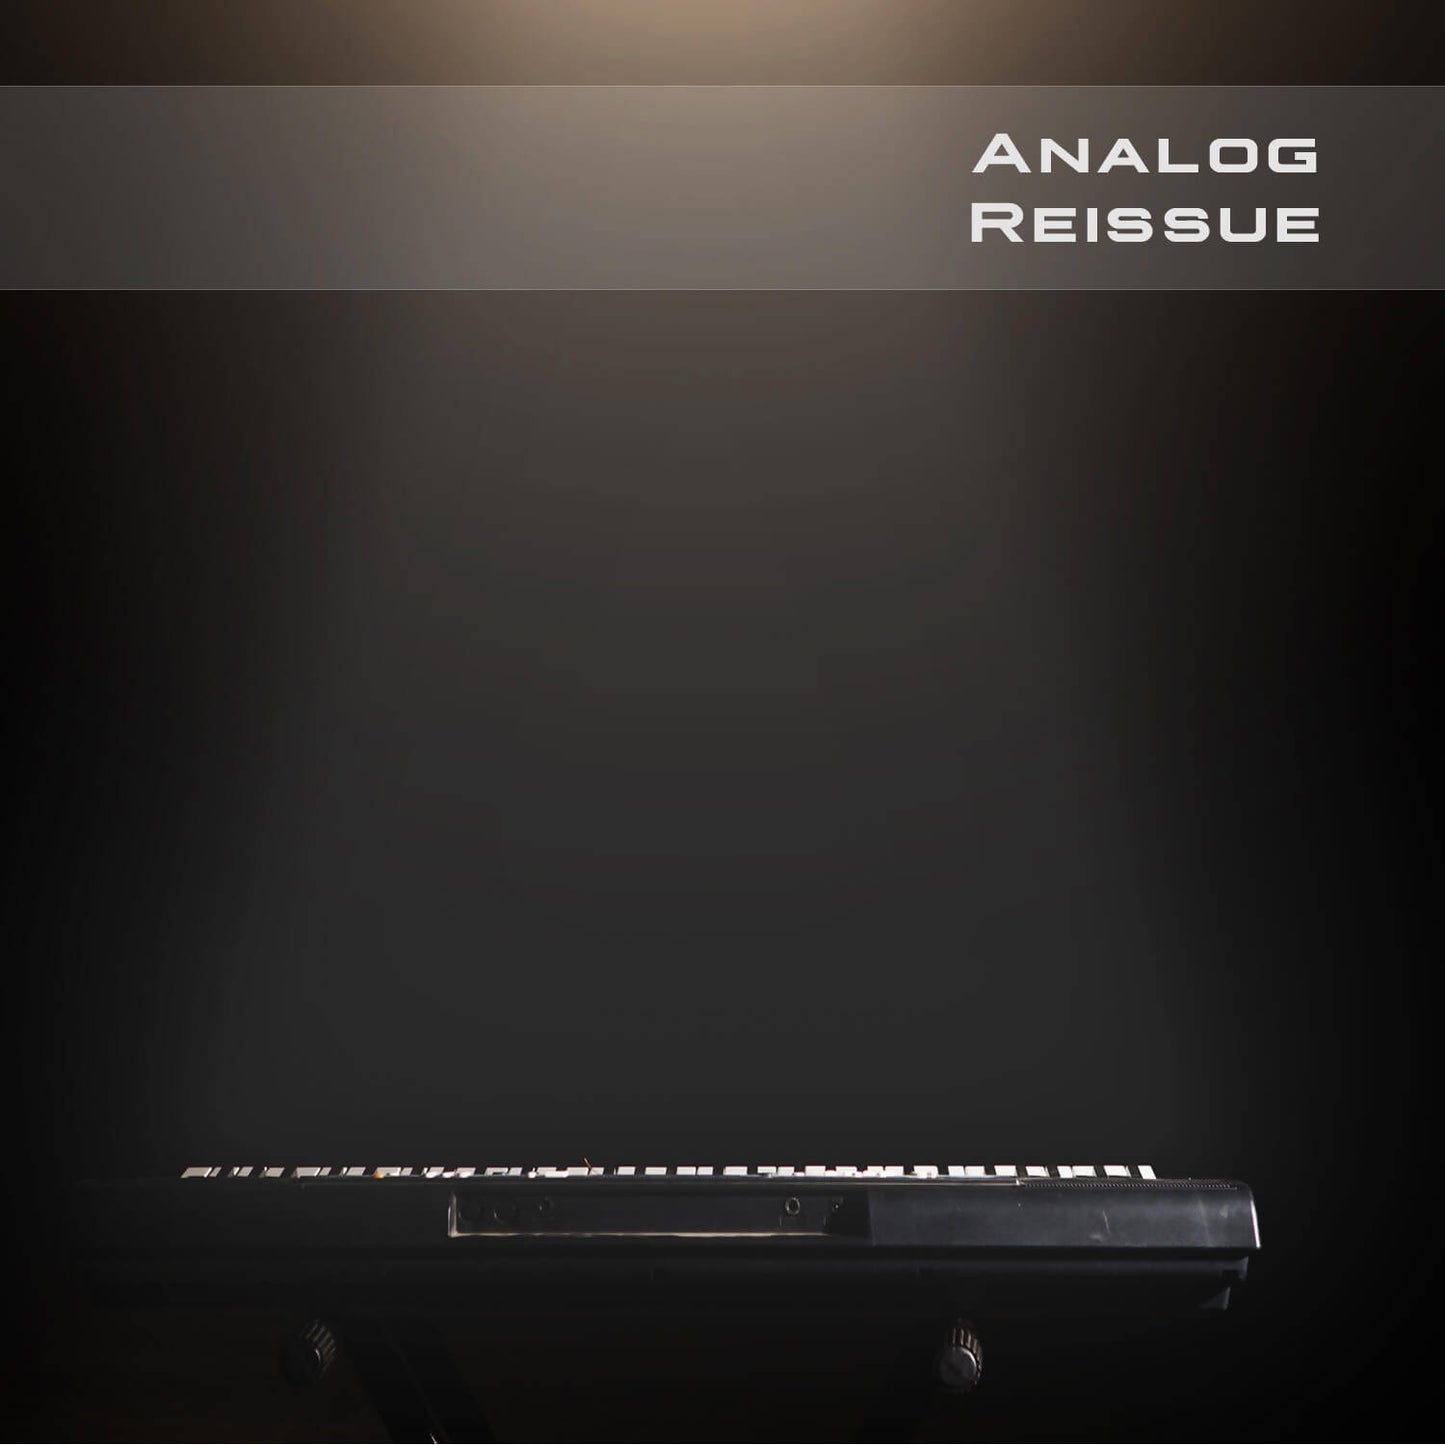 Analog Reissue is a eclectic collection of 100 handcrafted presets for Xils-Lab Syn’X 2.5